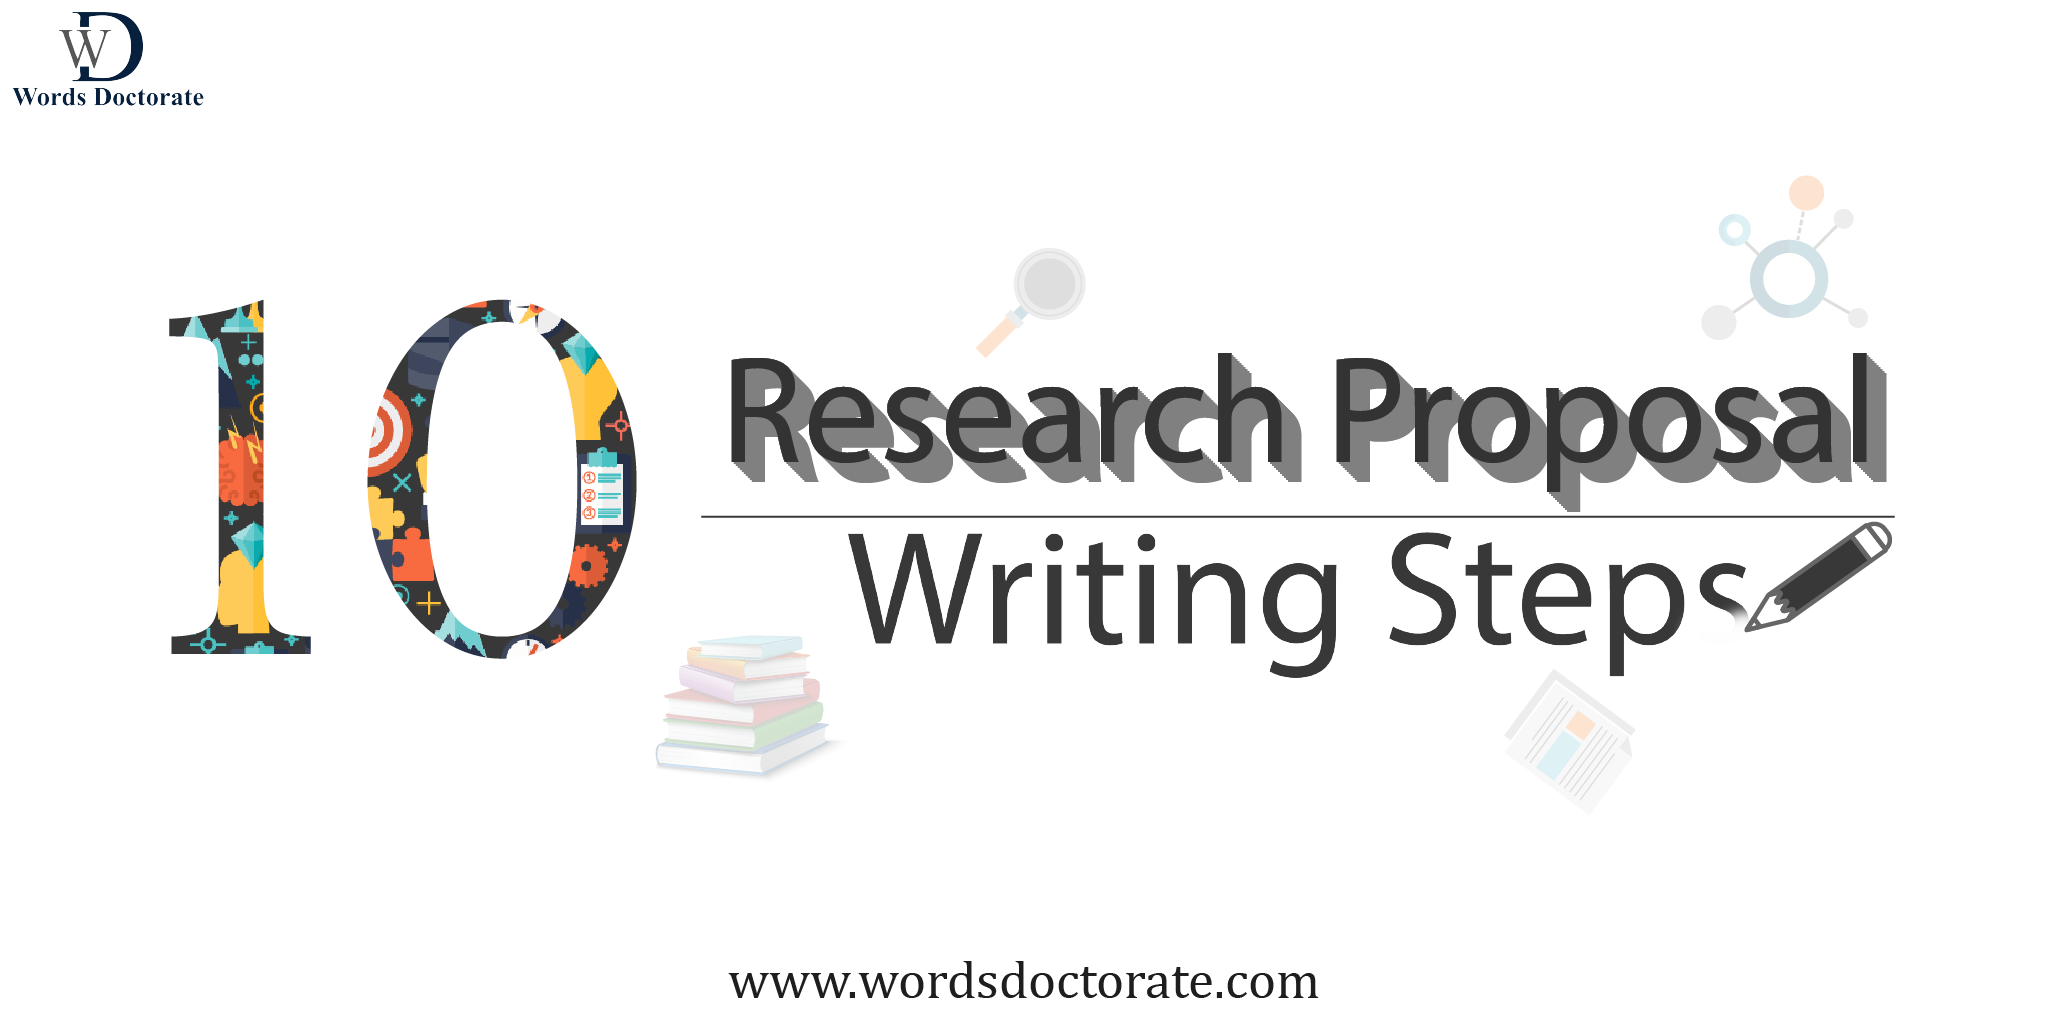 10 steps of research proposal